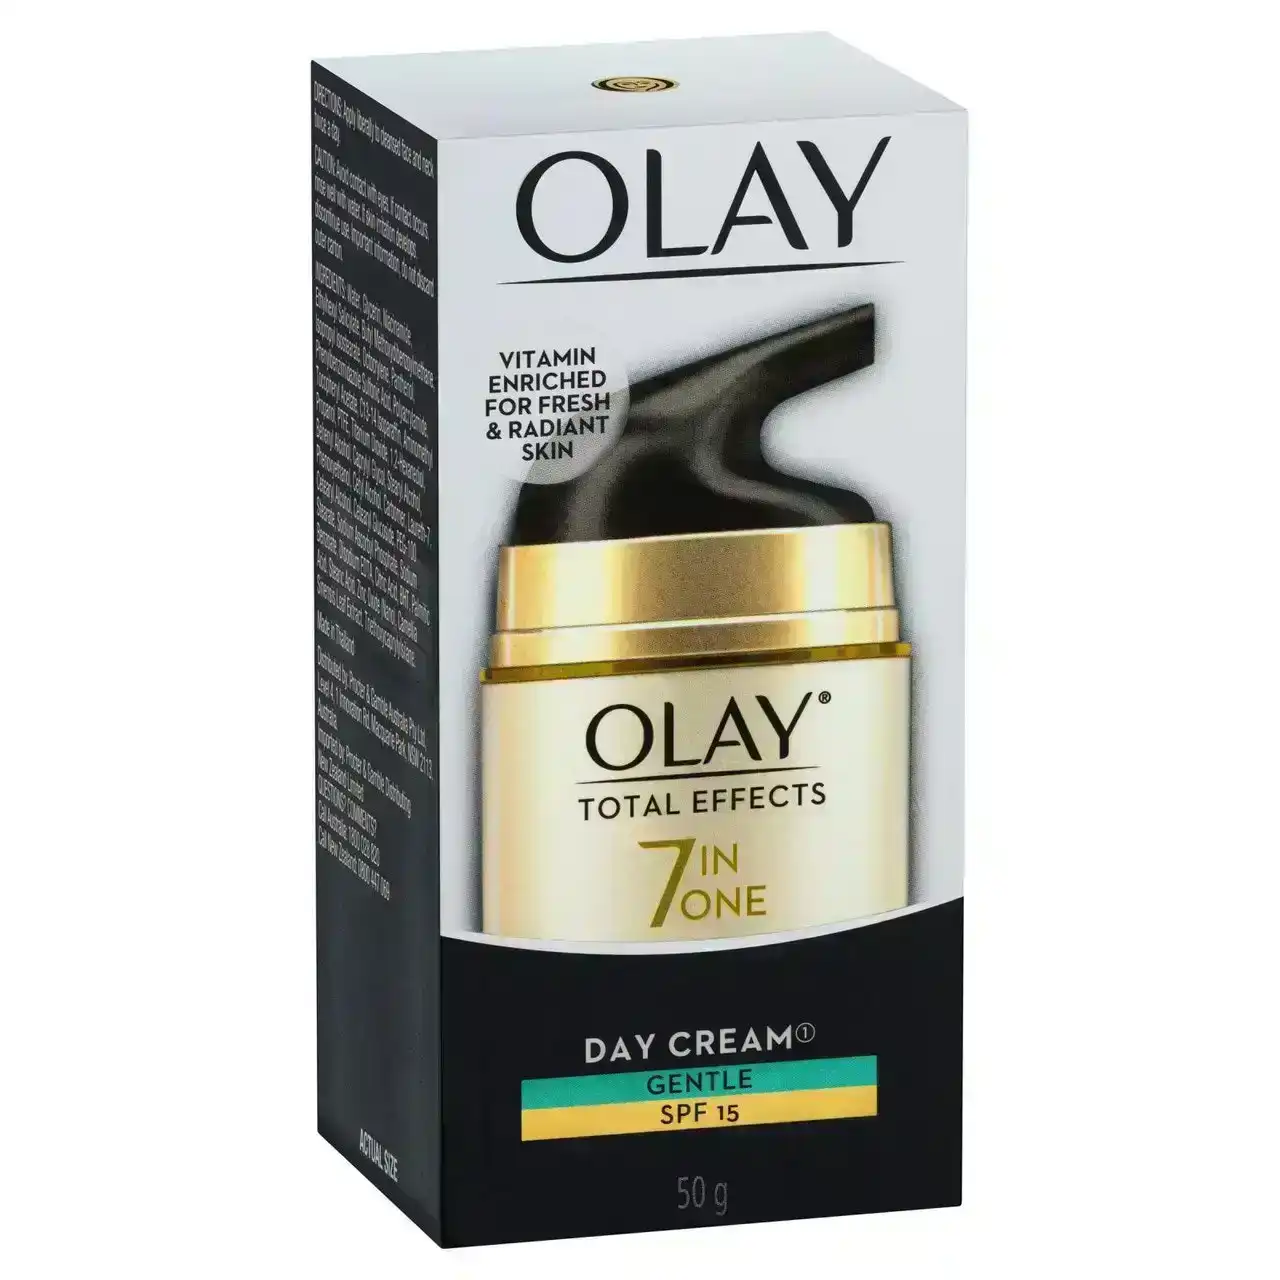 Olay Total Effects Day Cream Gentle SPF 15 50g